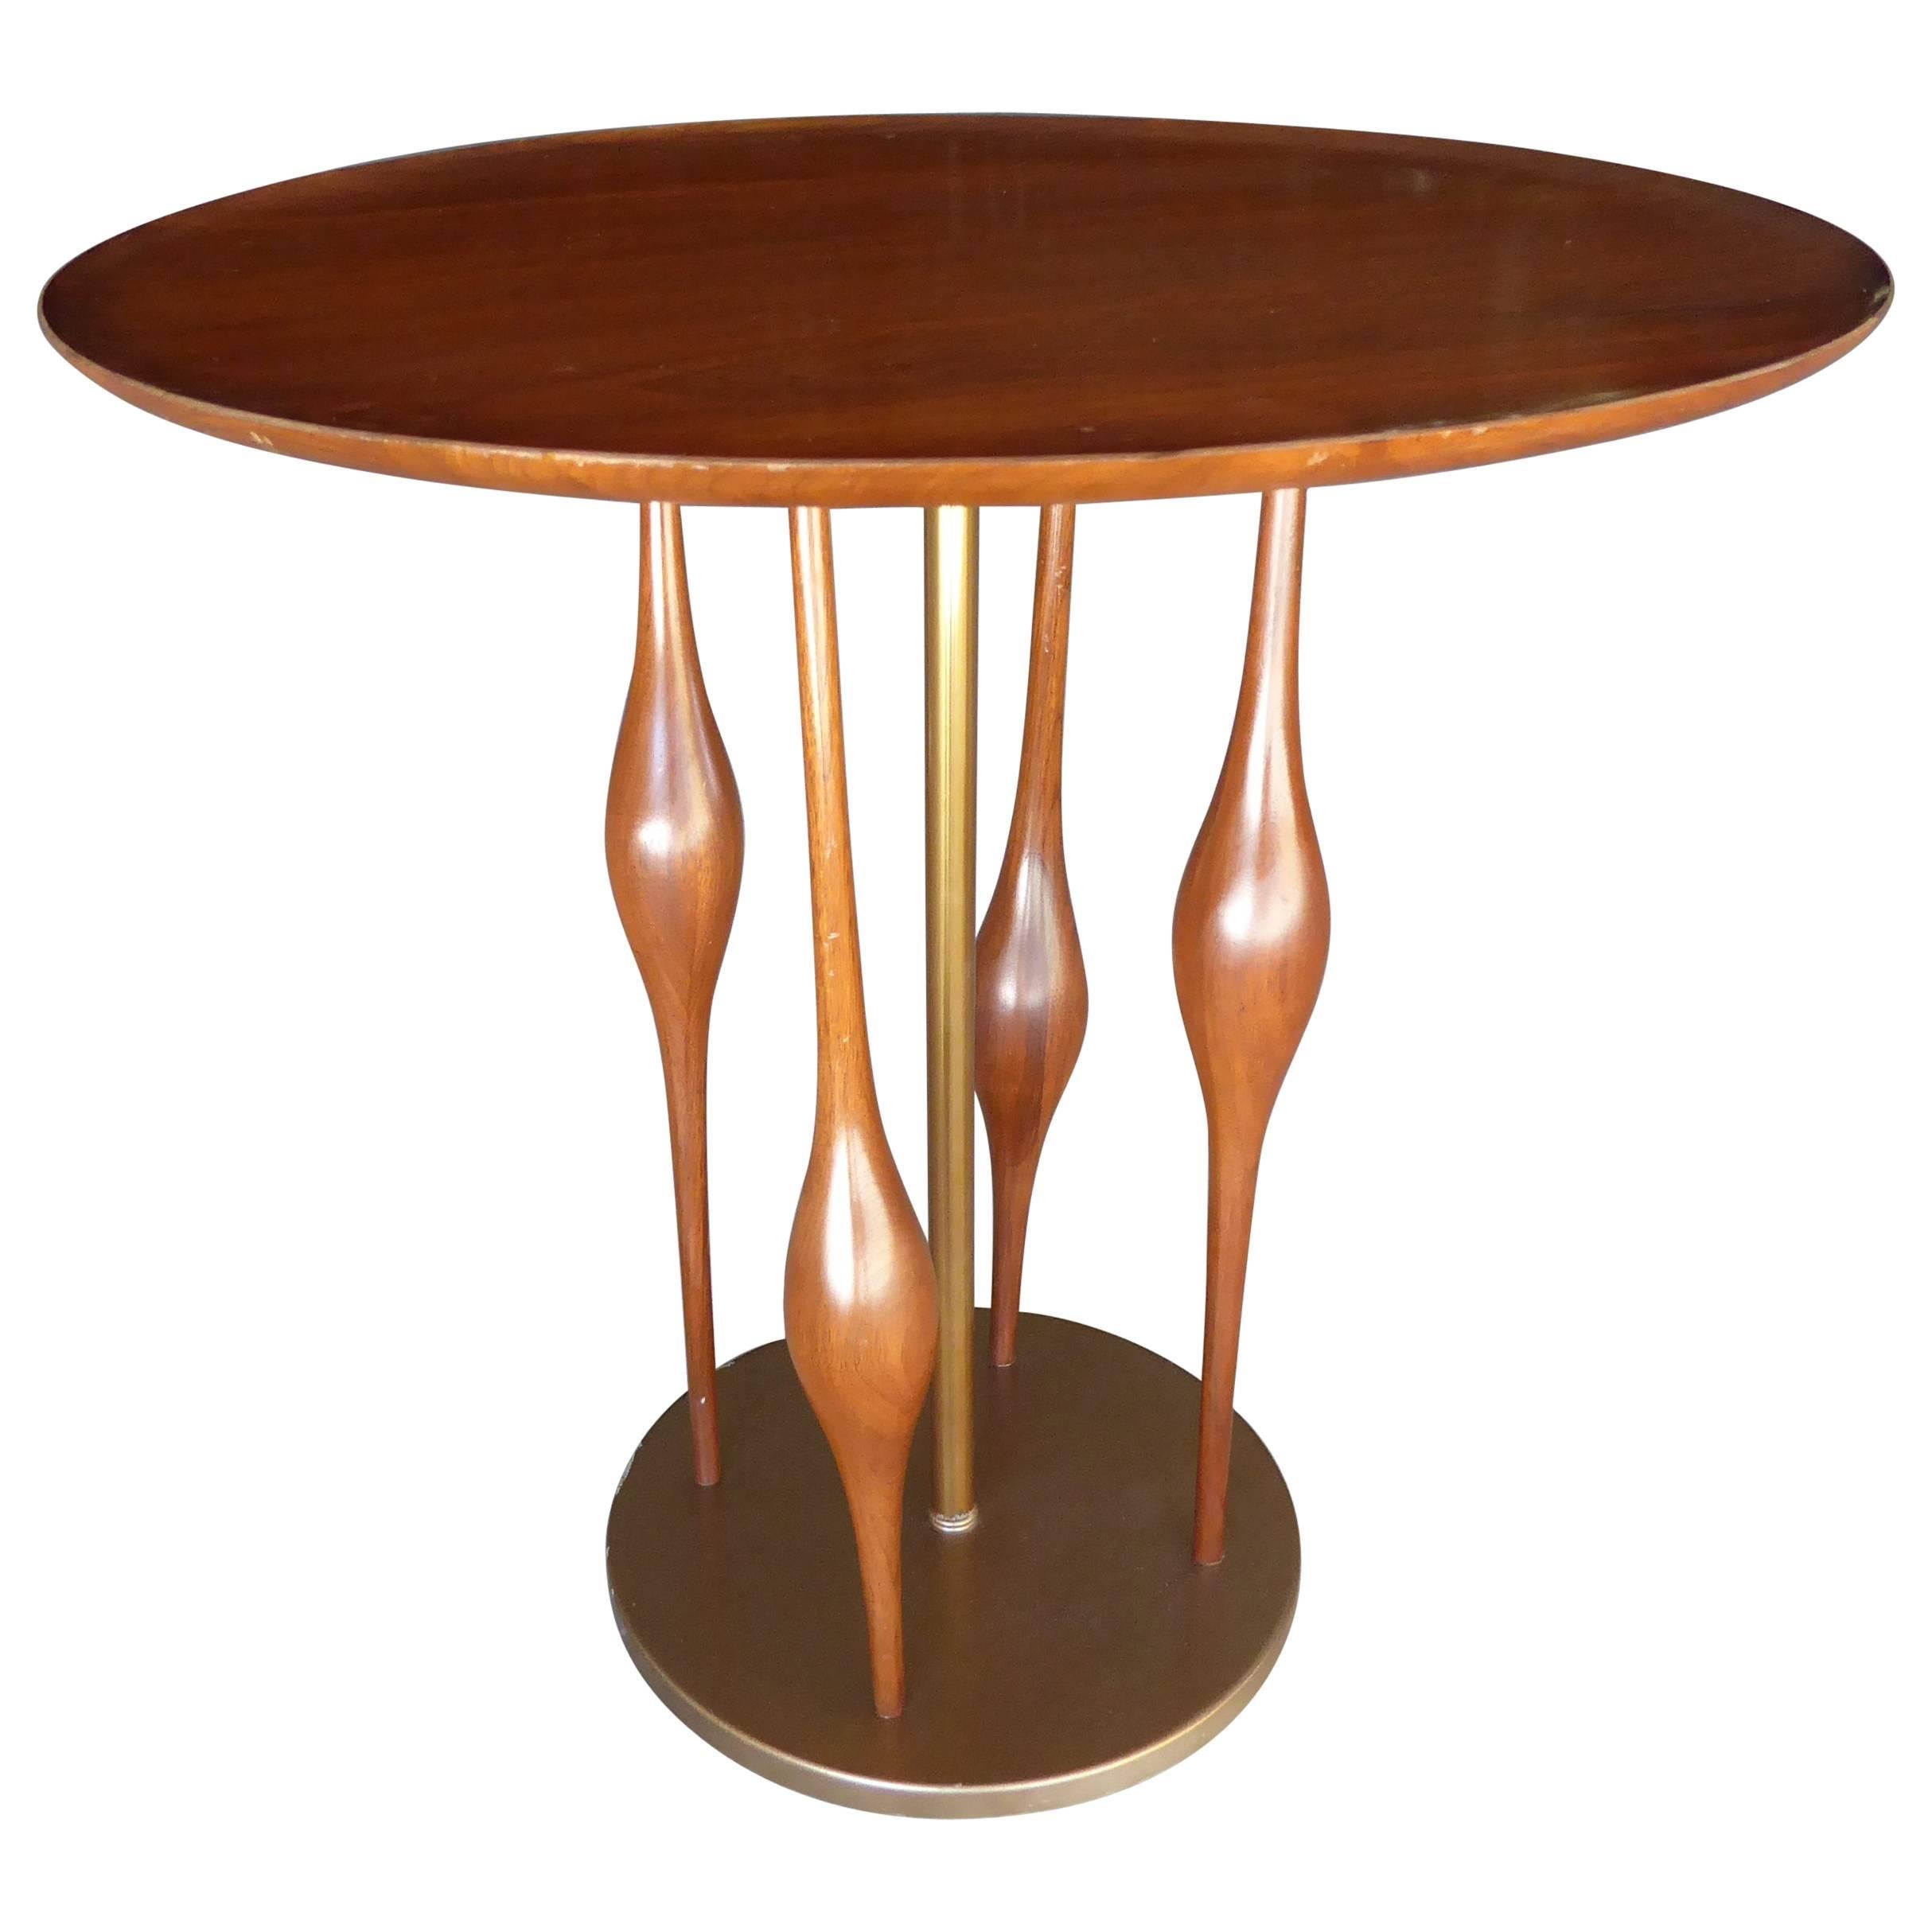 Mode Line Mahogany Side Table Attributed to Adrian Pearsall C. 1950's For Sale